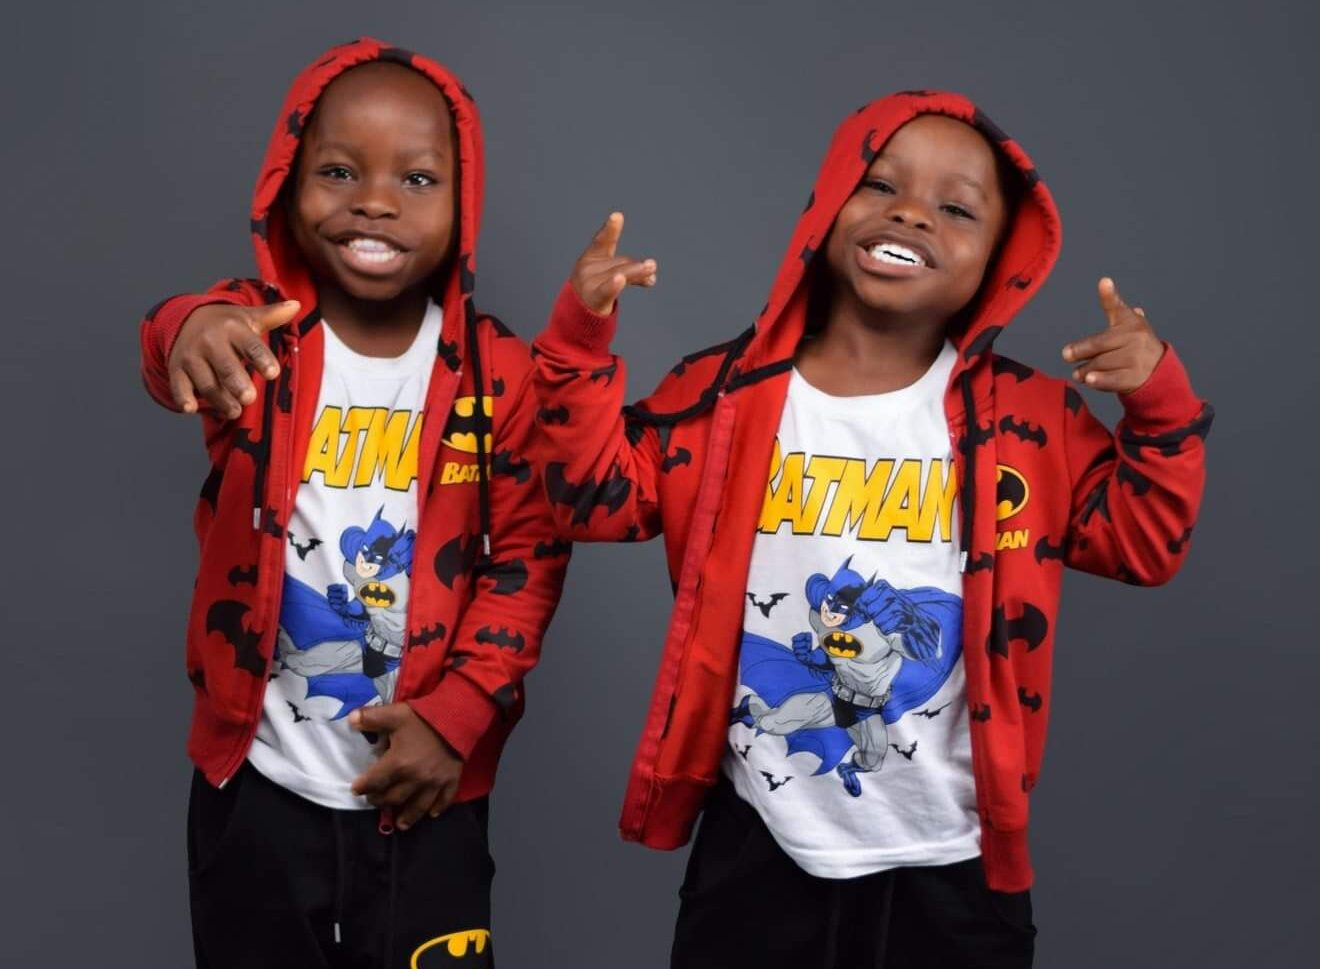 Wahala Twins Biography, Age, Real Name, Net Worth, Origin, Parents, Date of Birth